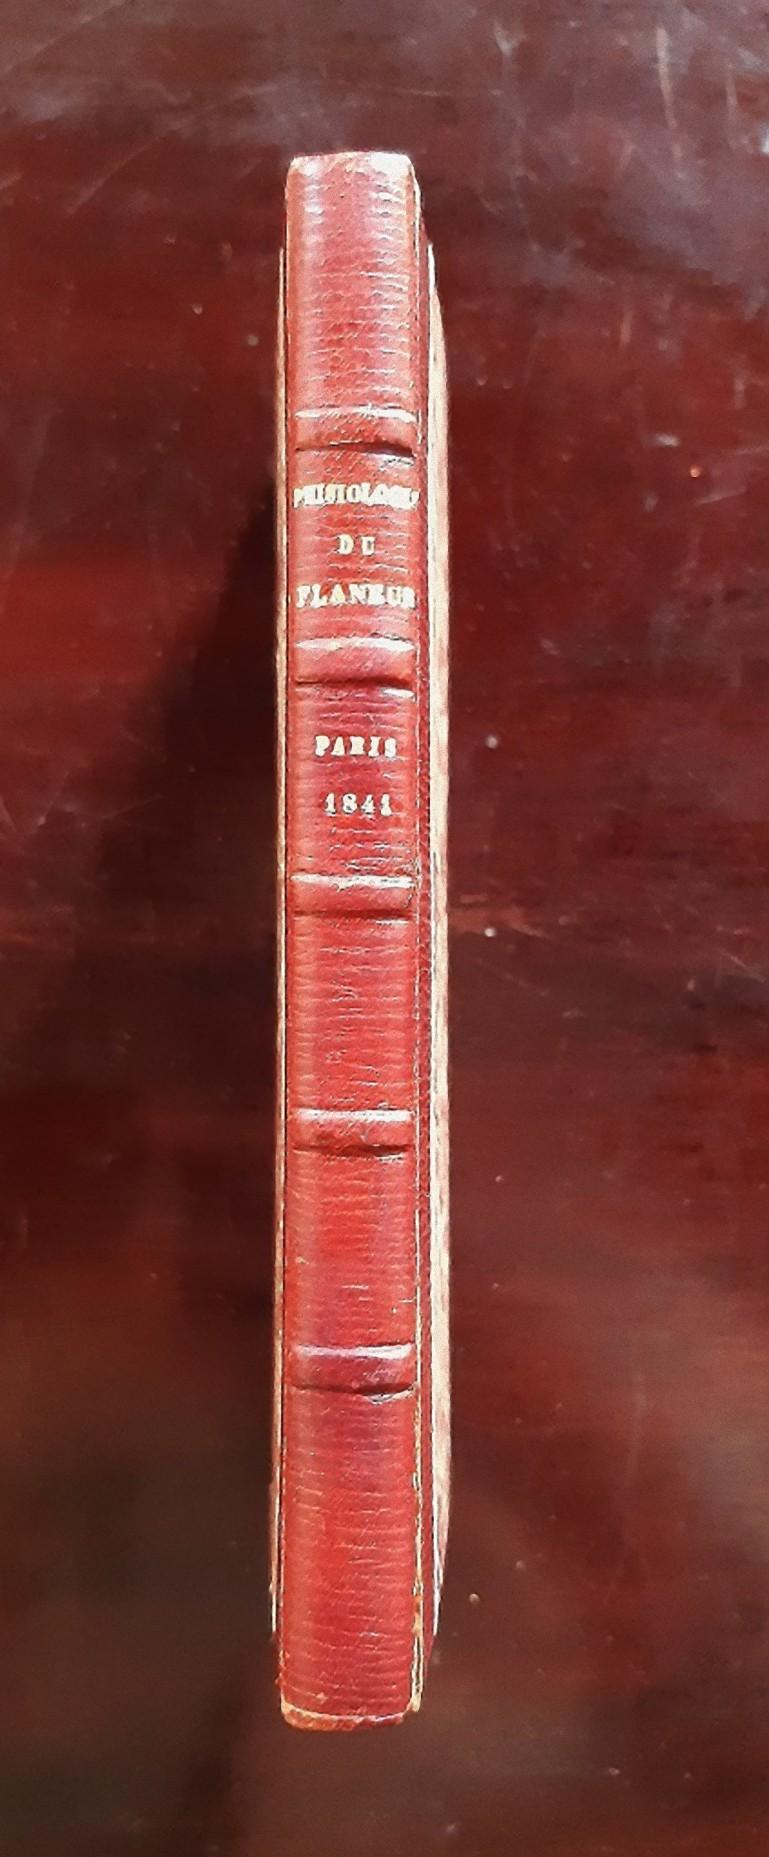 Physiologie du Flaneur - Rare Book Illustrated by Honoré Daumier - 1841 For Sale 1